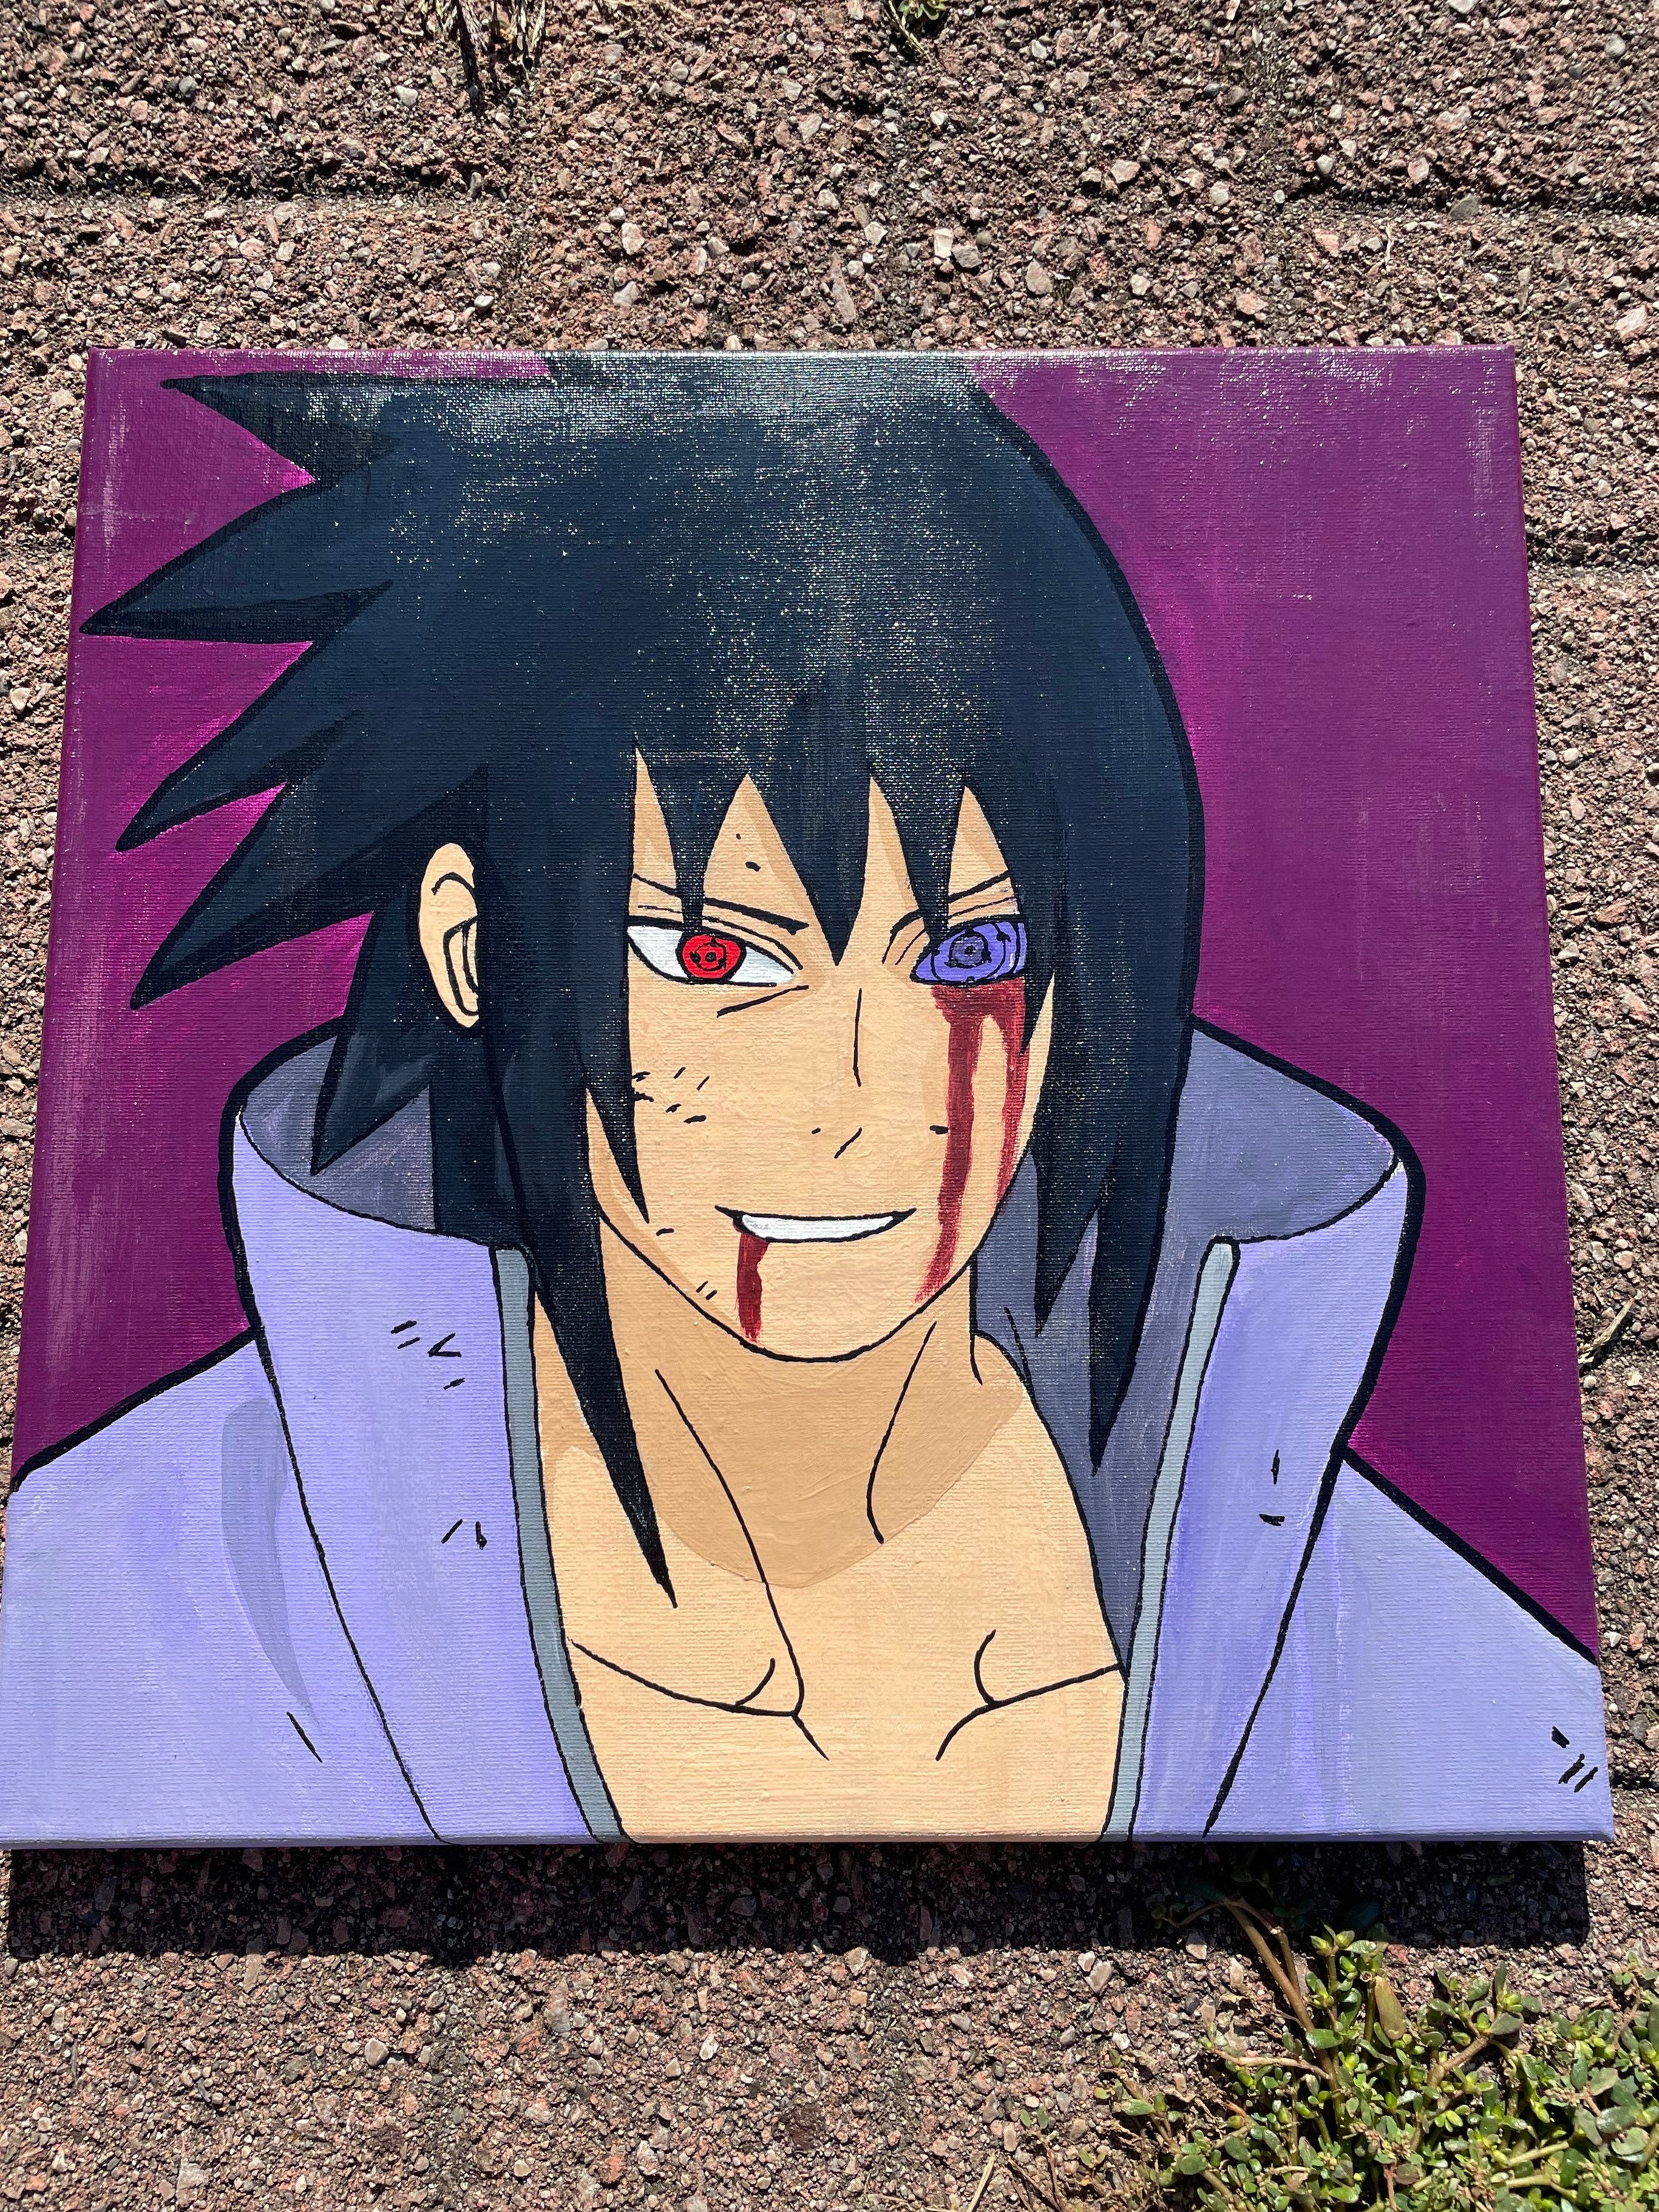 Naruto Uchiha Shisui Anime Canvas Art Poster Home Wall Decoration Painting  Bedroom Living Room Office Decoration Poster 08×12inch(20×30cm) :  : Home